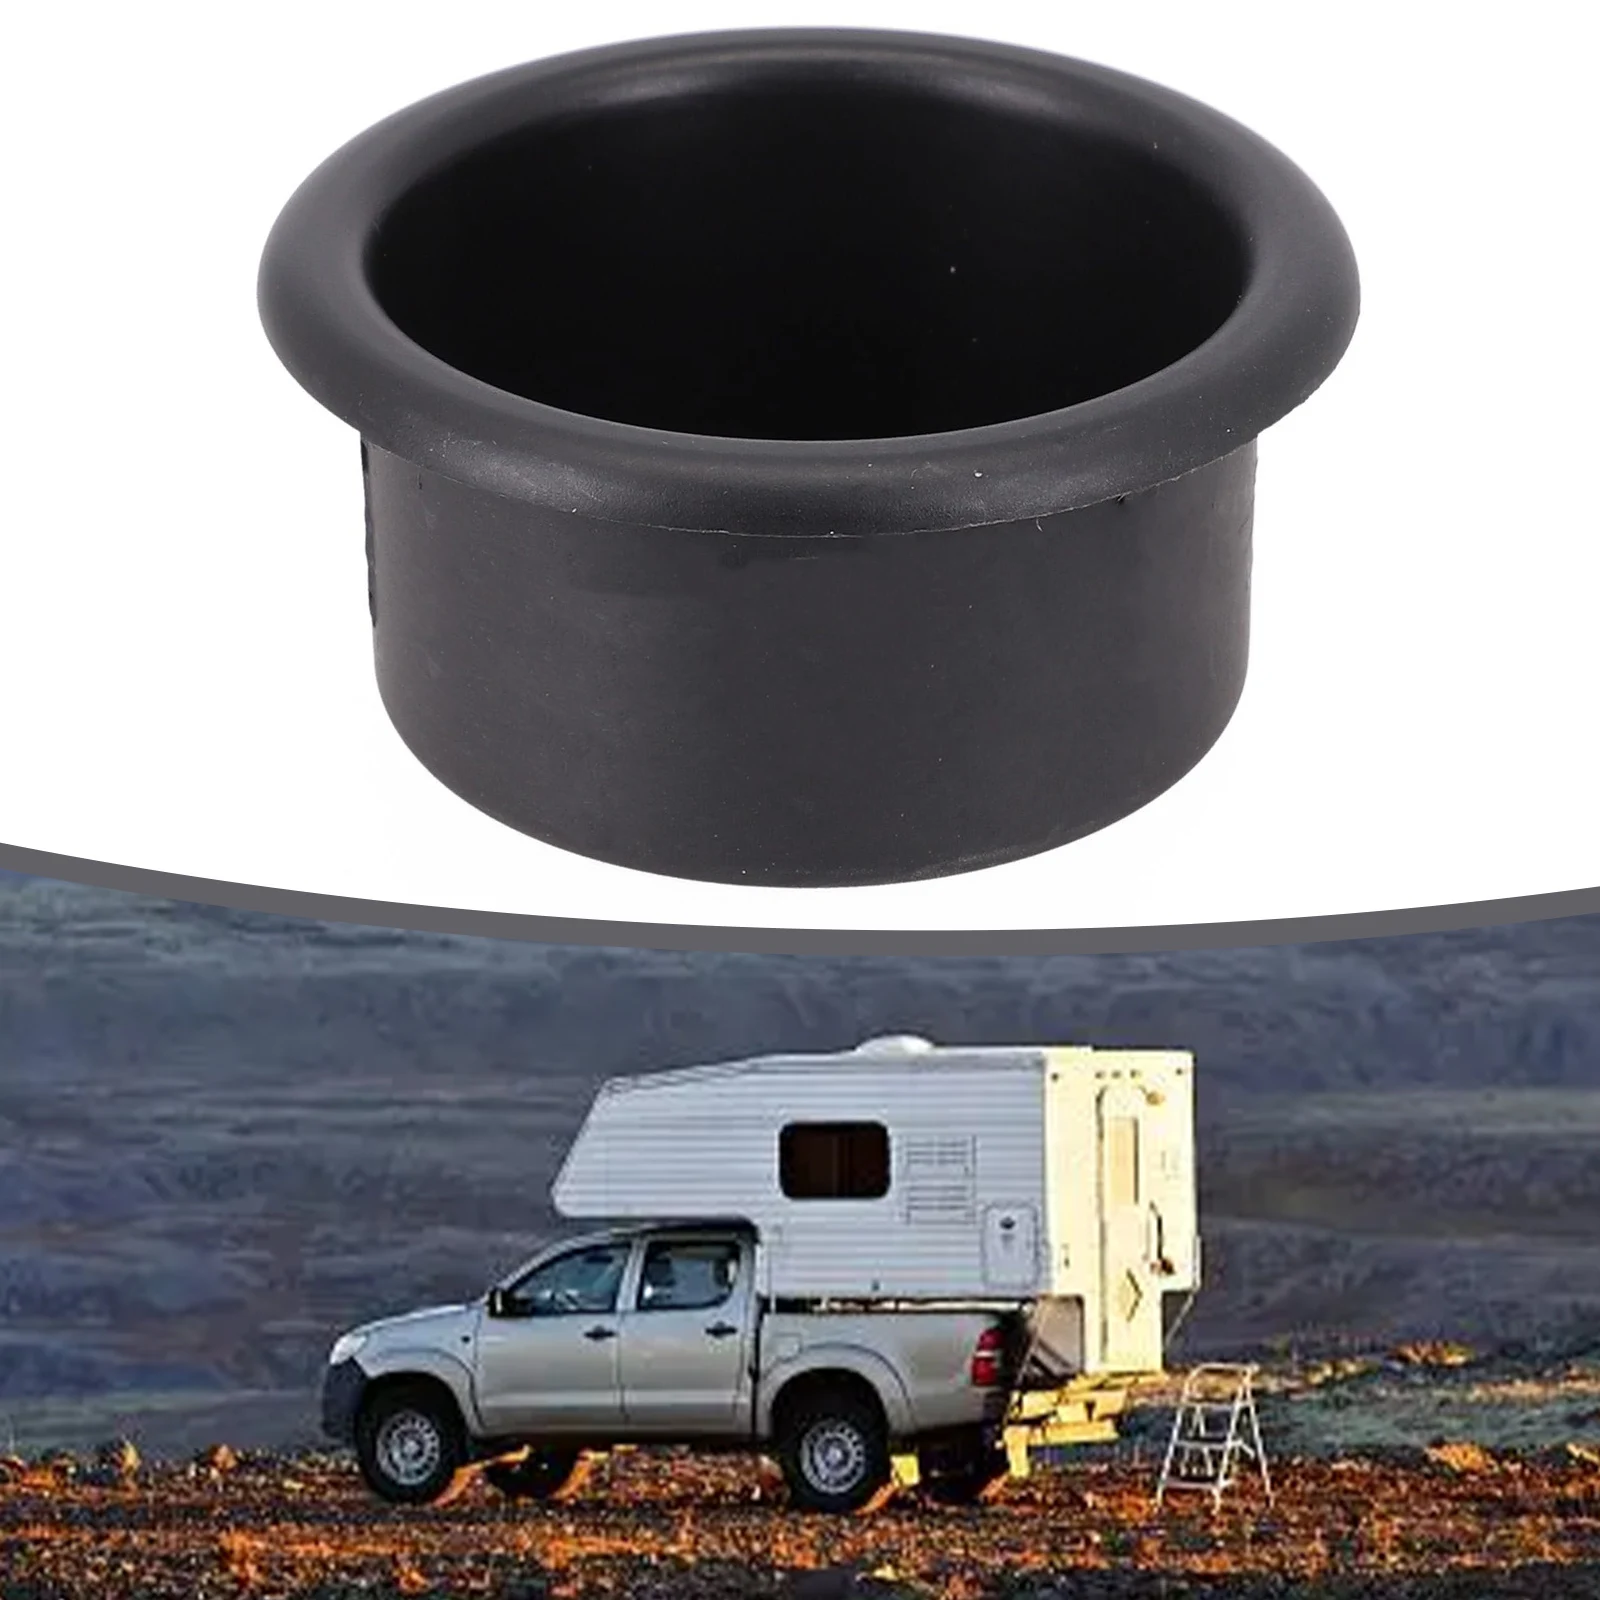 

1x Black Cup Water Drink Car Cup Holder Recessed For RV/Car/Marine/Boat/Trailer Plastic Cup Holder Automobiles Accessories